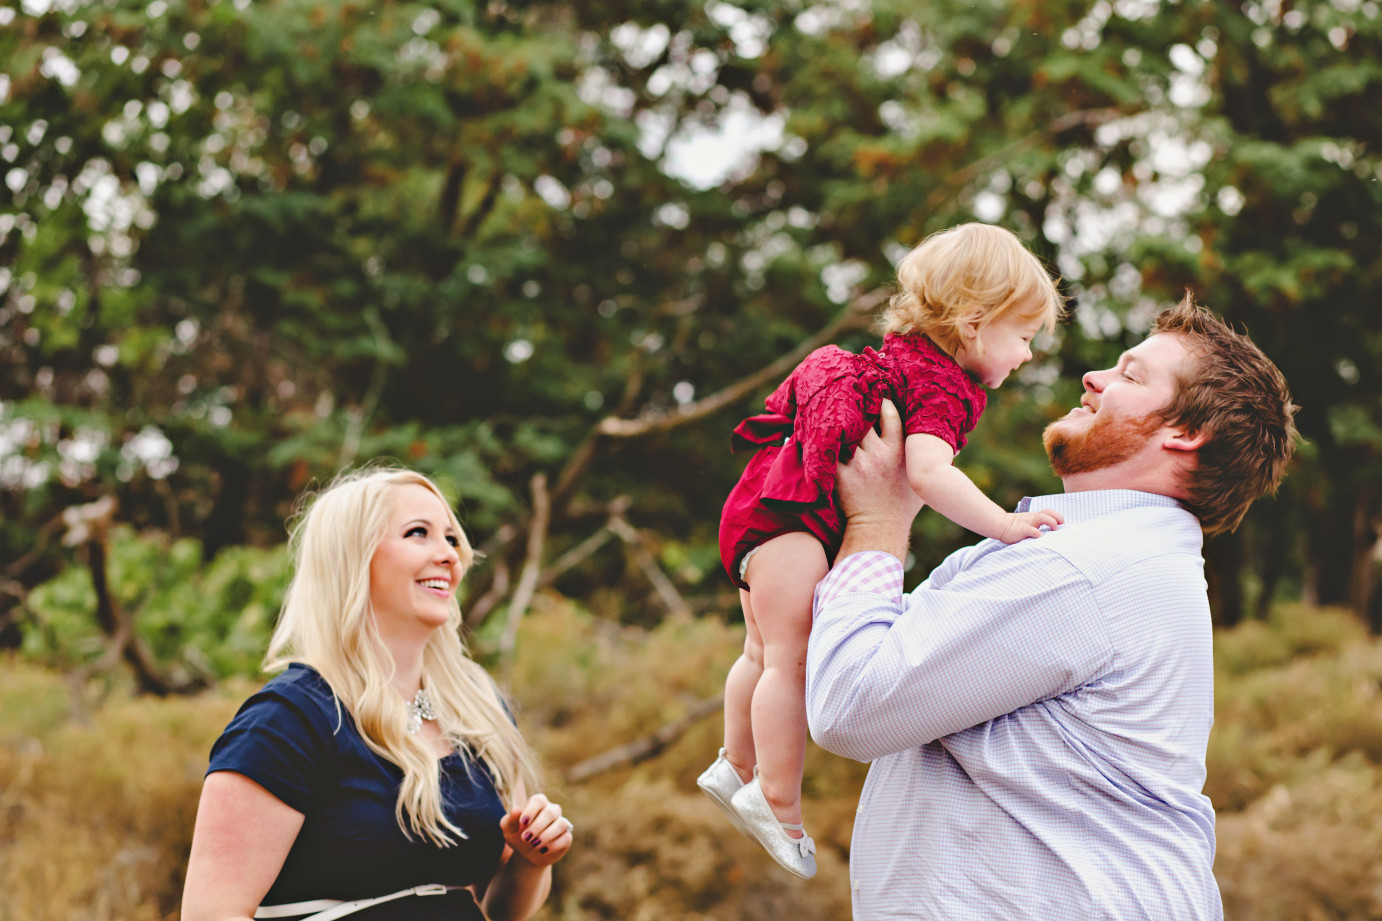 Wenatchee Photographer Thankful Misty C. Photography with hubby and baby photo